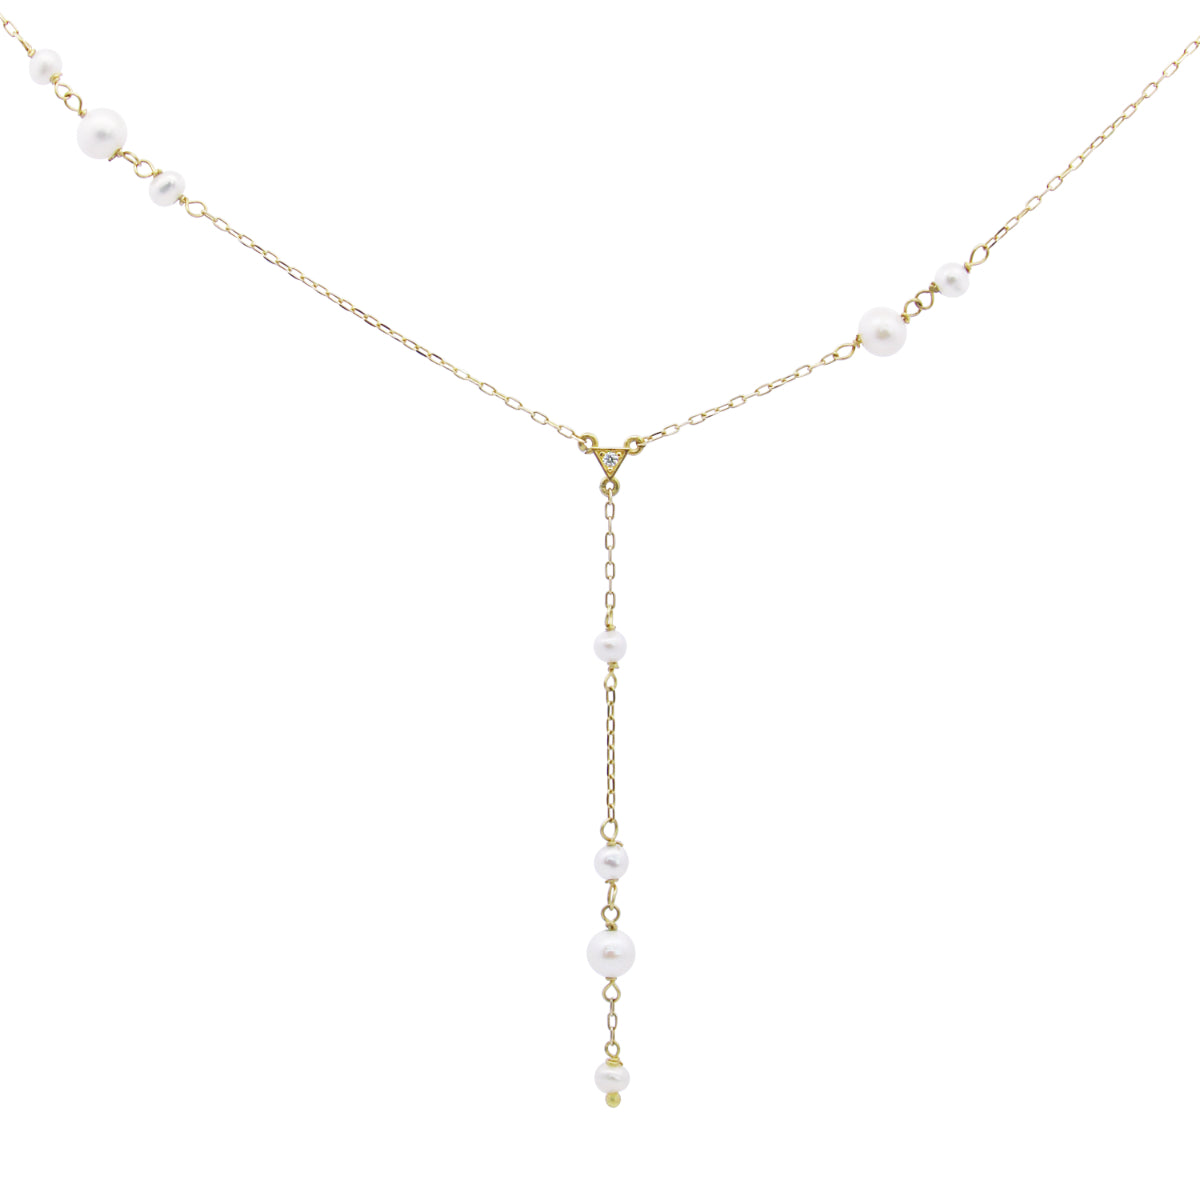 Gold rosary necklace with small pearl - ORO18KT